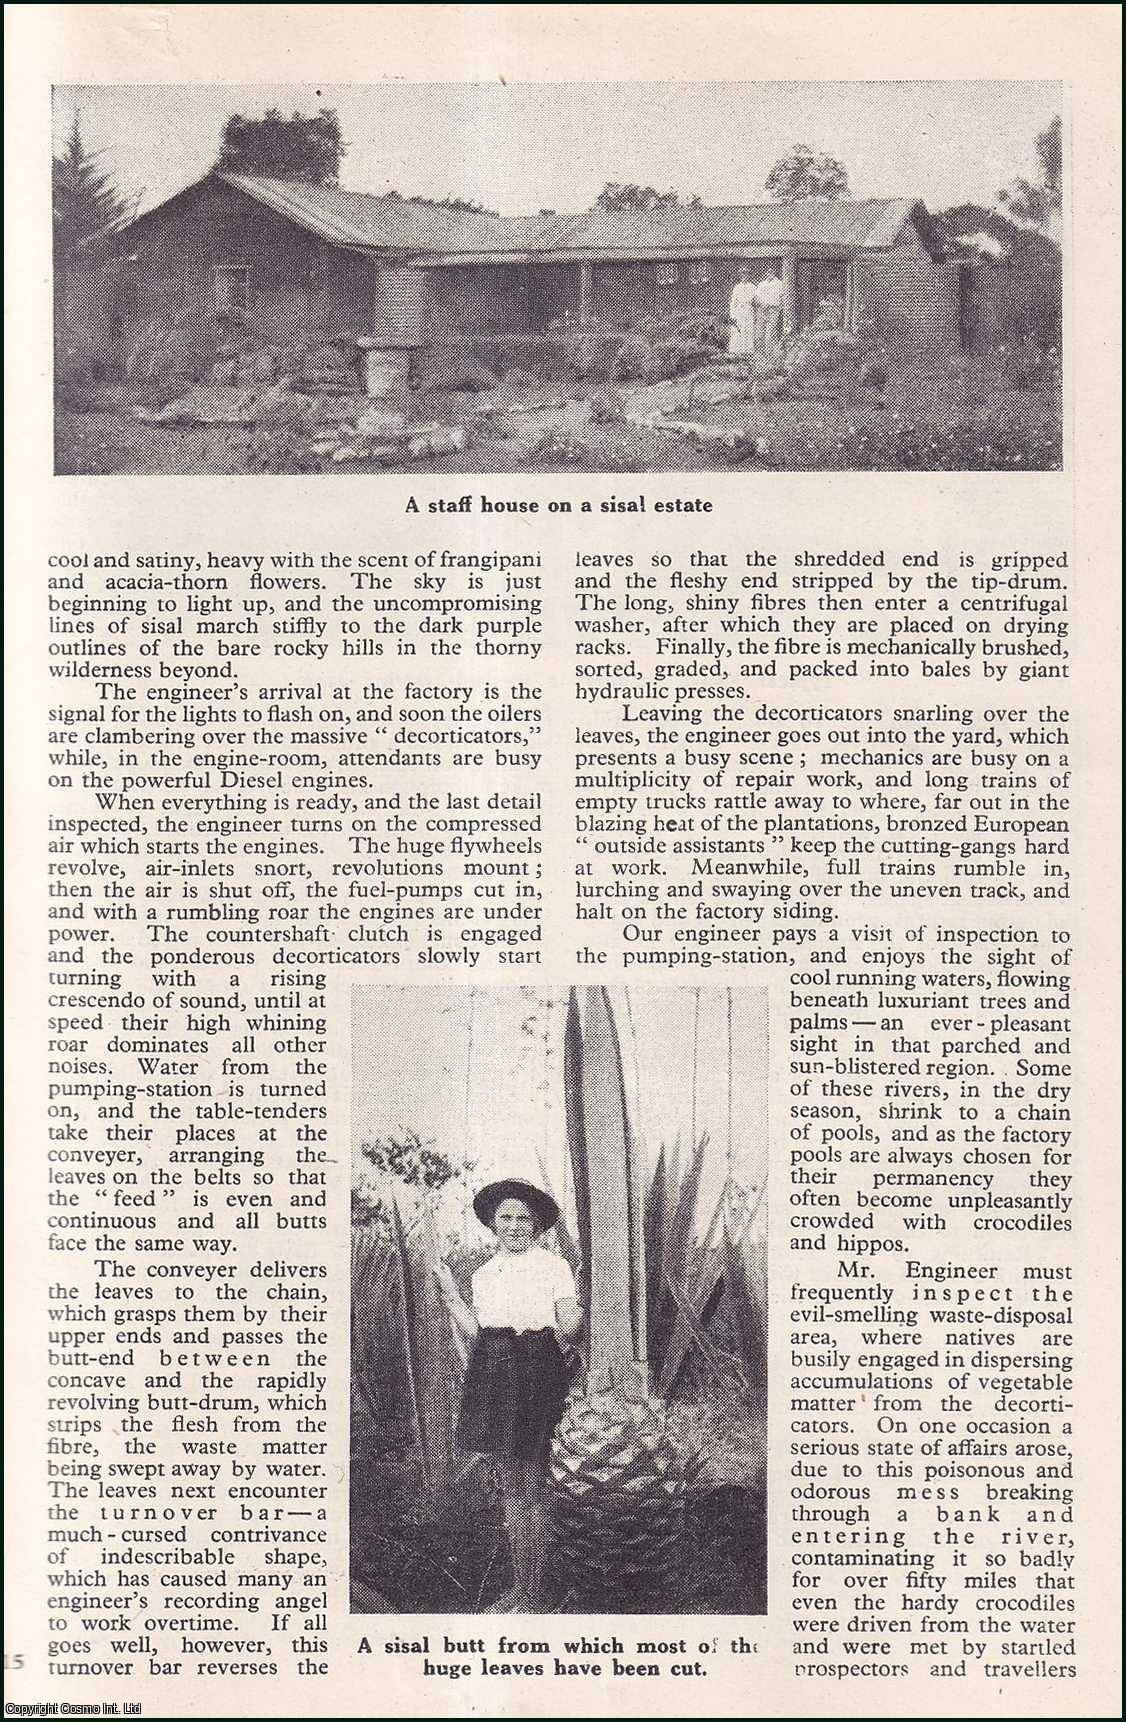 G.E.G. Plant - Sisal Engineer : Plantations. An uncommon original article from the Wide World Magazine, 1946.